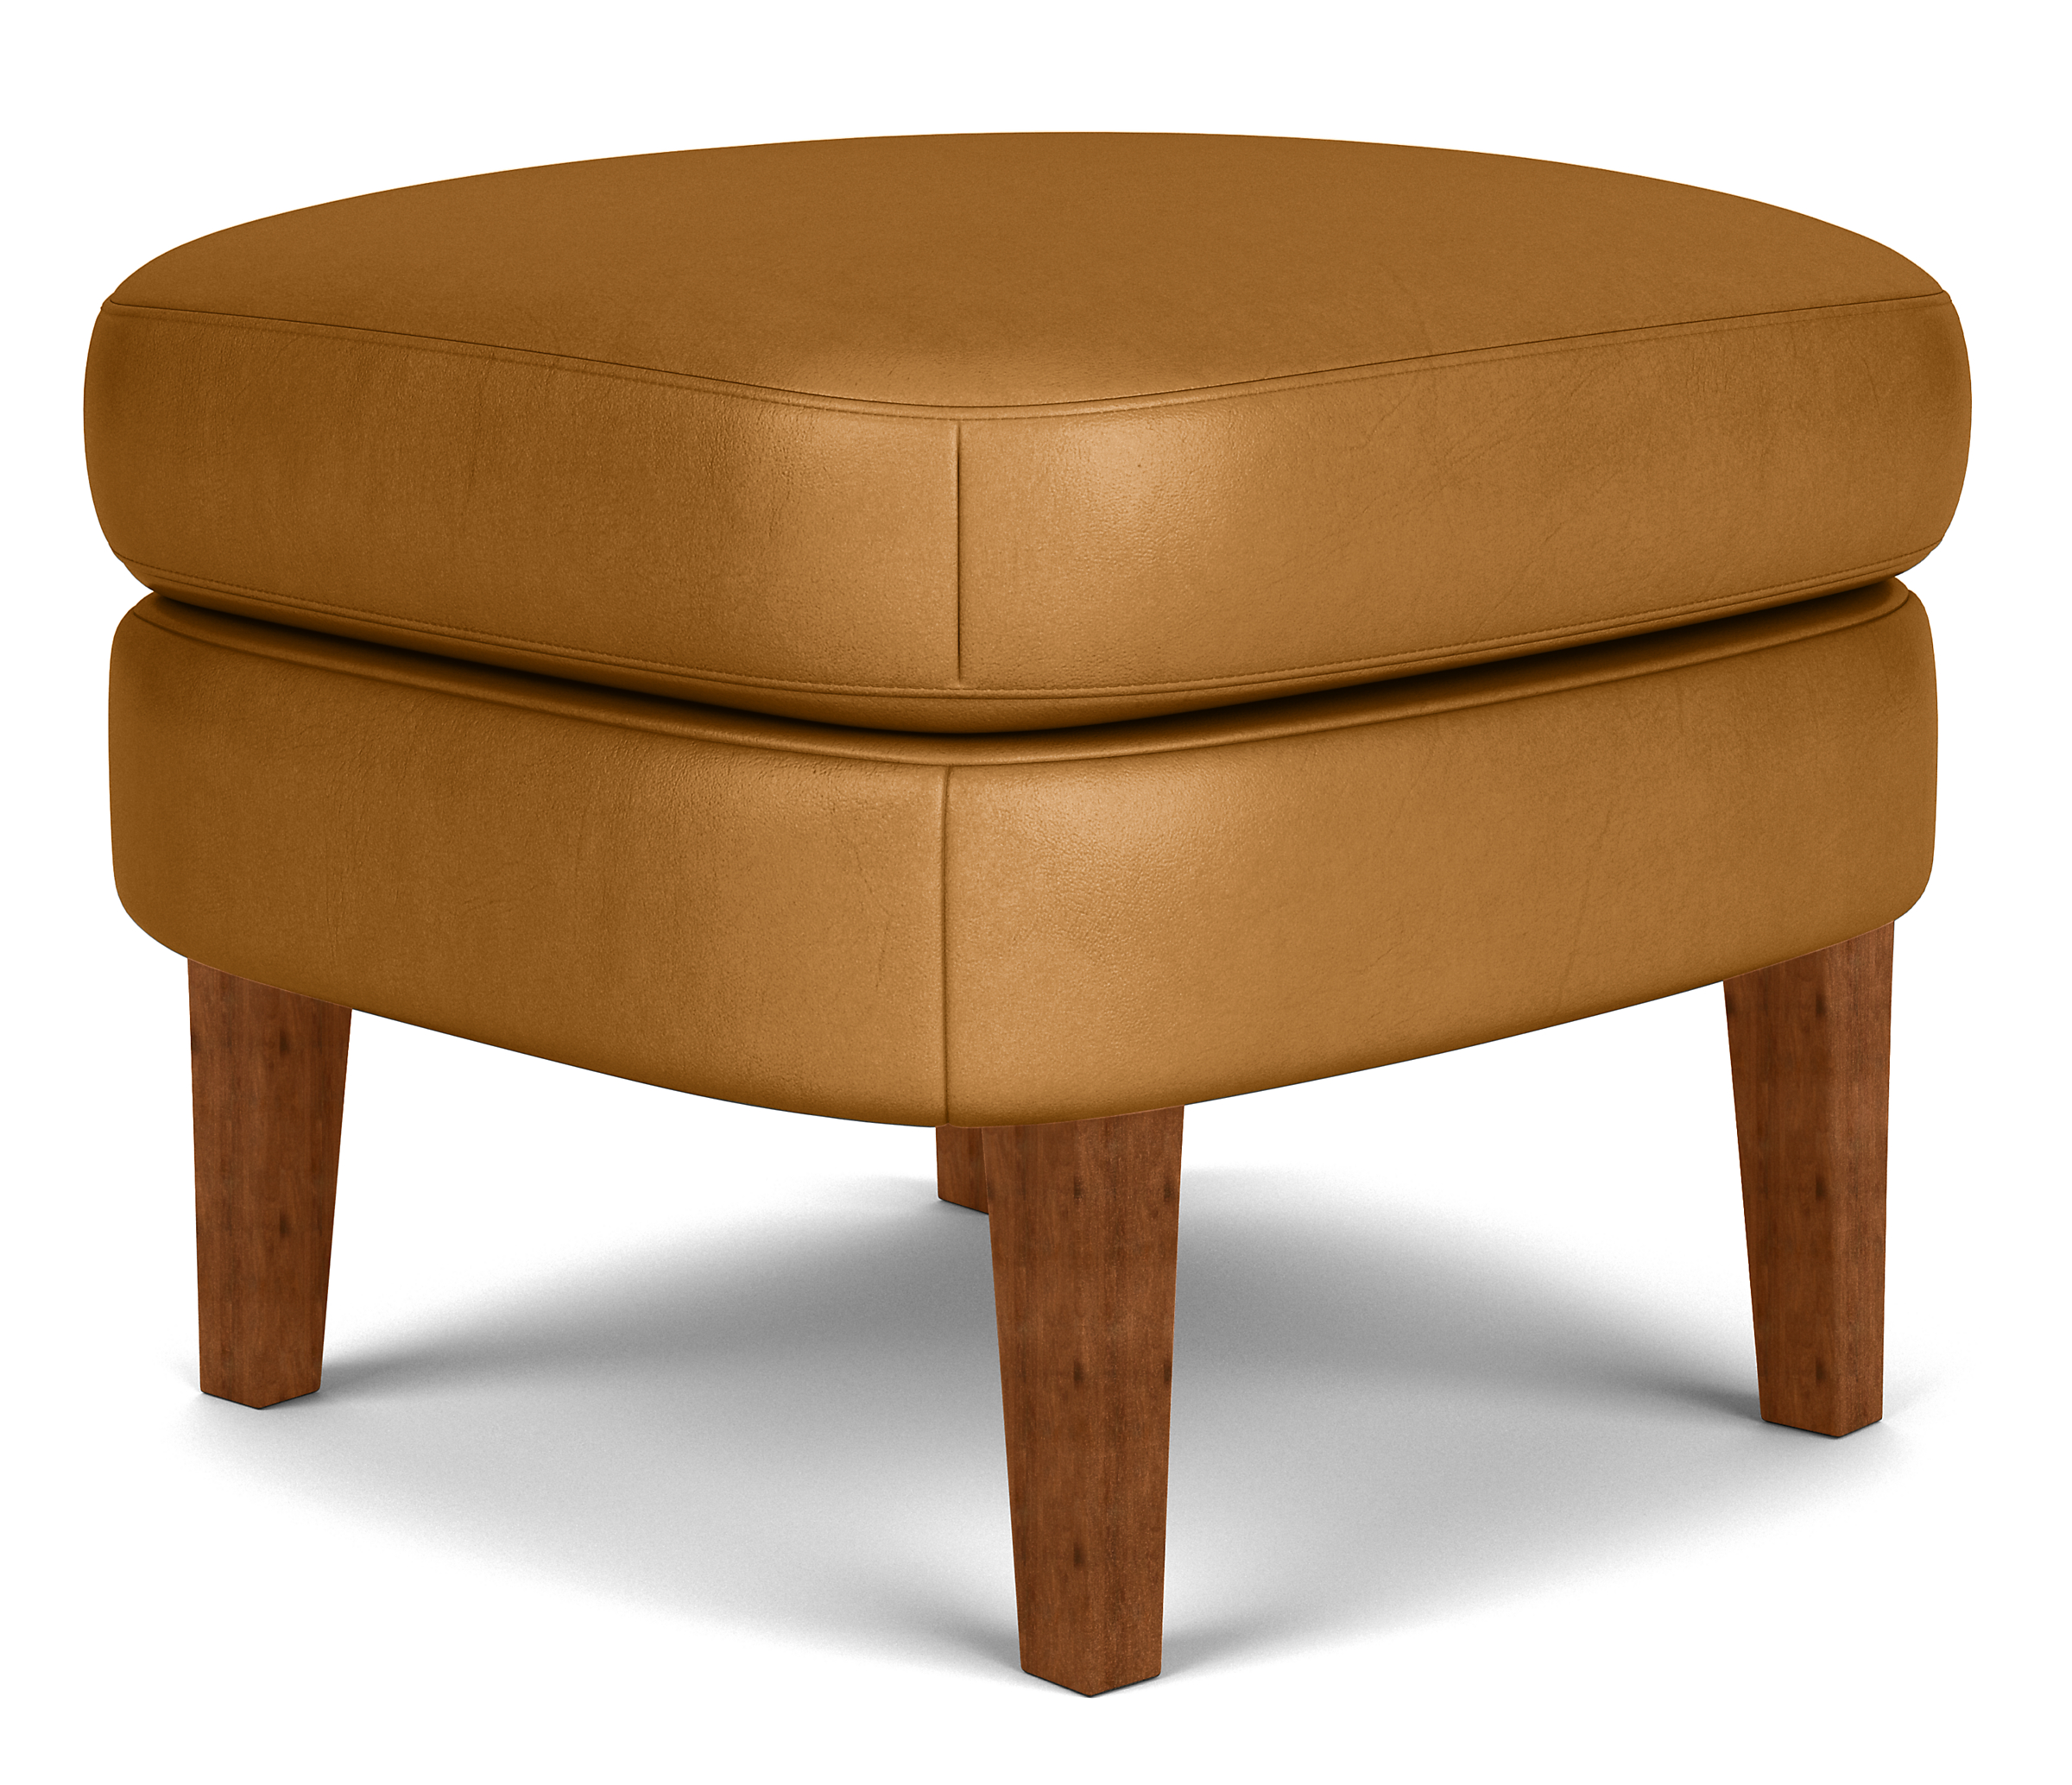 Louise 21w 18d 16h Ottoman in Vento Camel Leather with Mocha Legs